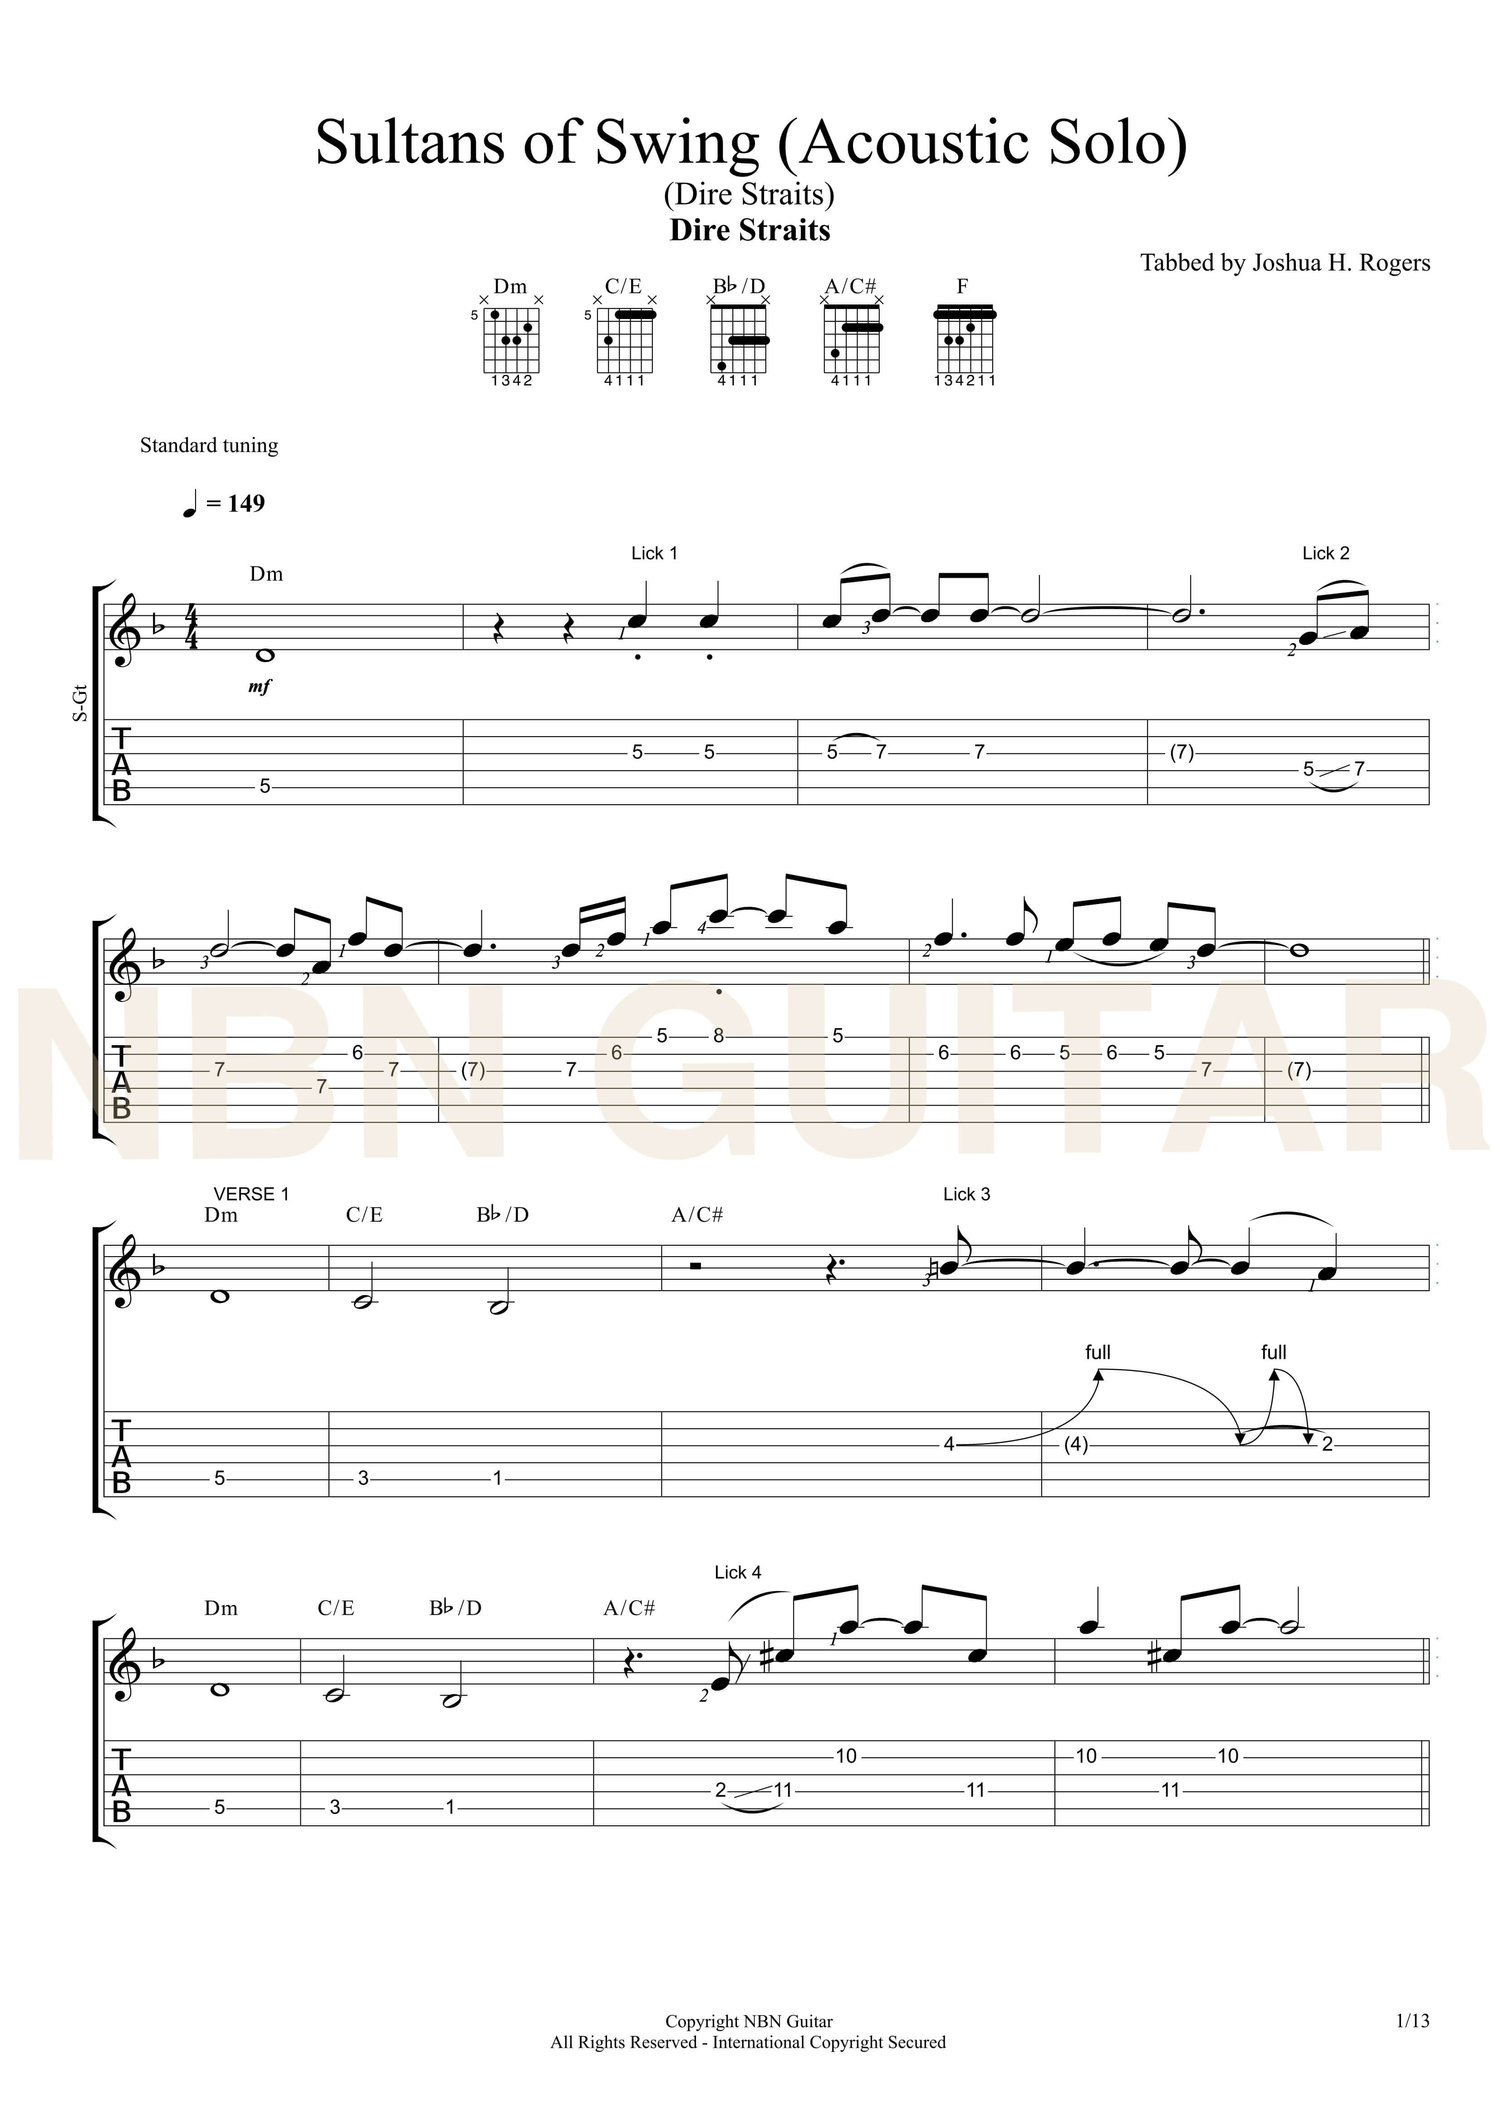 exagerar Oficiales étnico Sultans of Swing 'Acoustic Solo' Free Sheet Music & Tabs — NBN Guitar